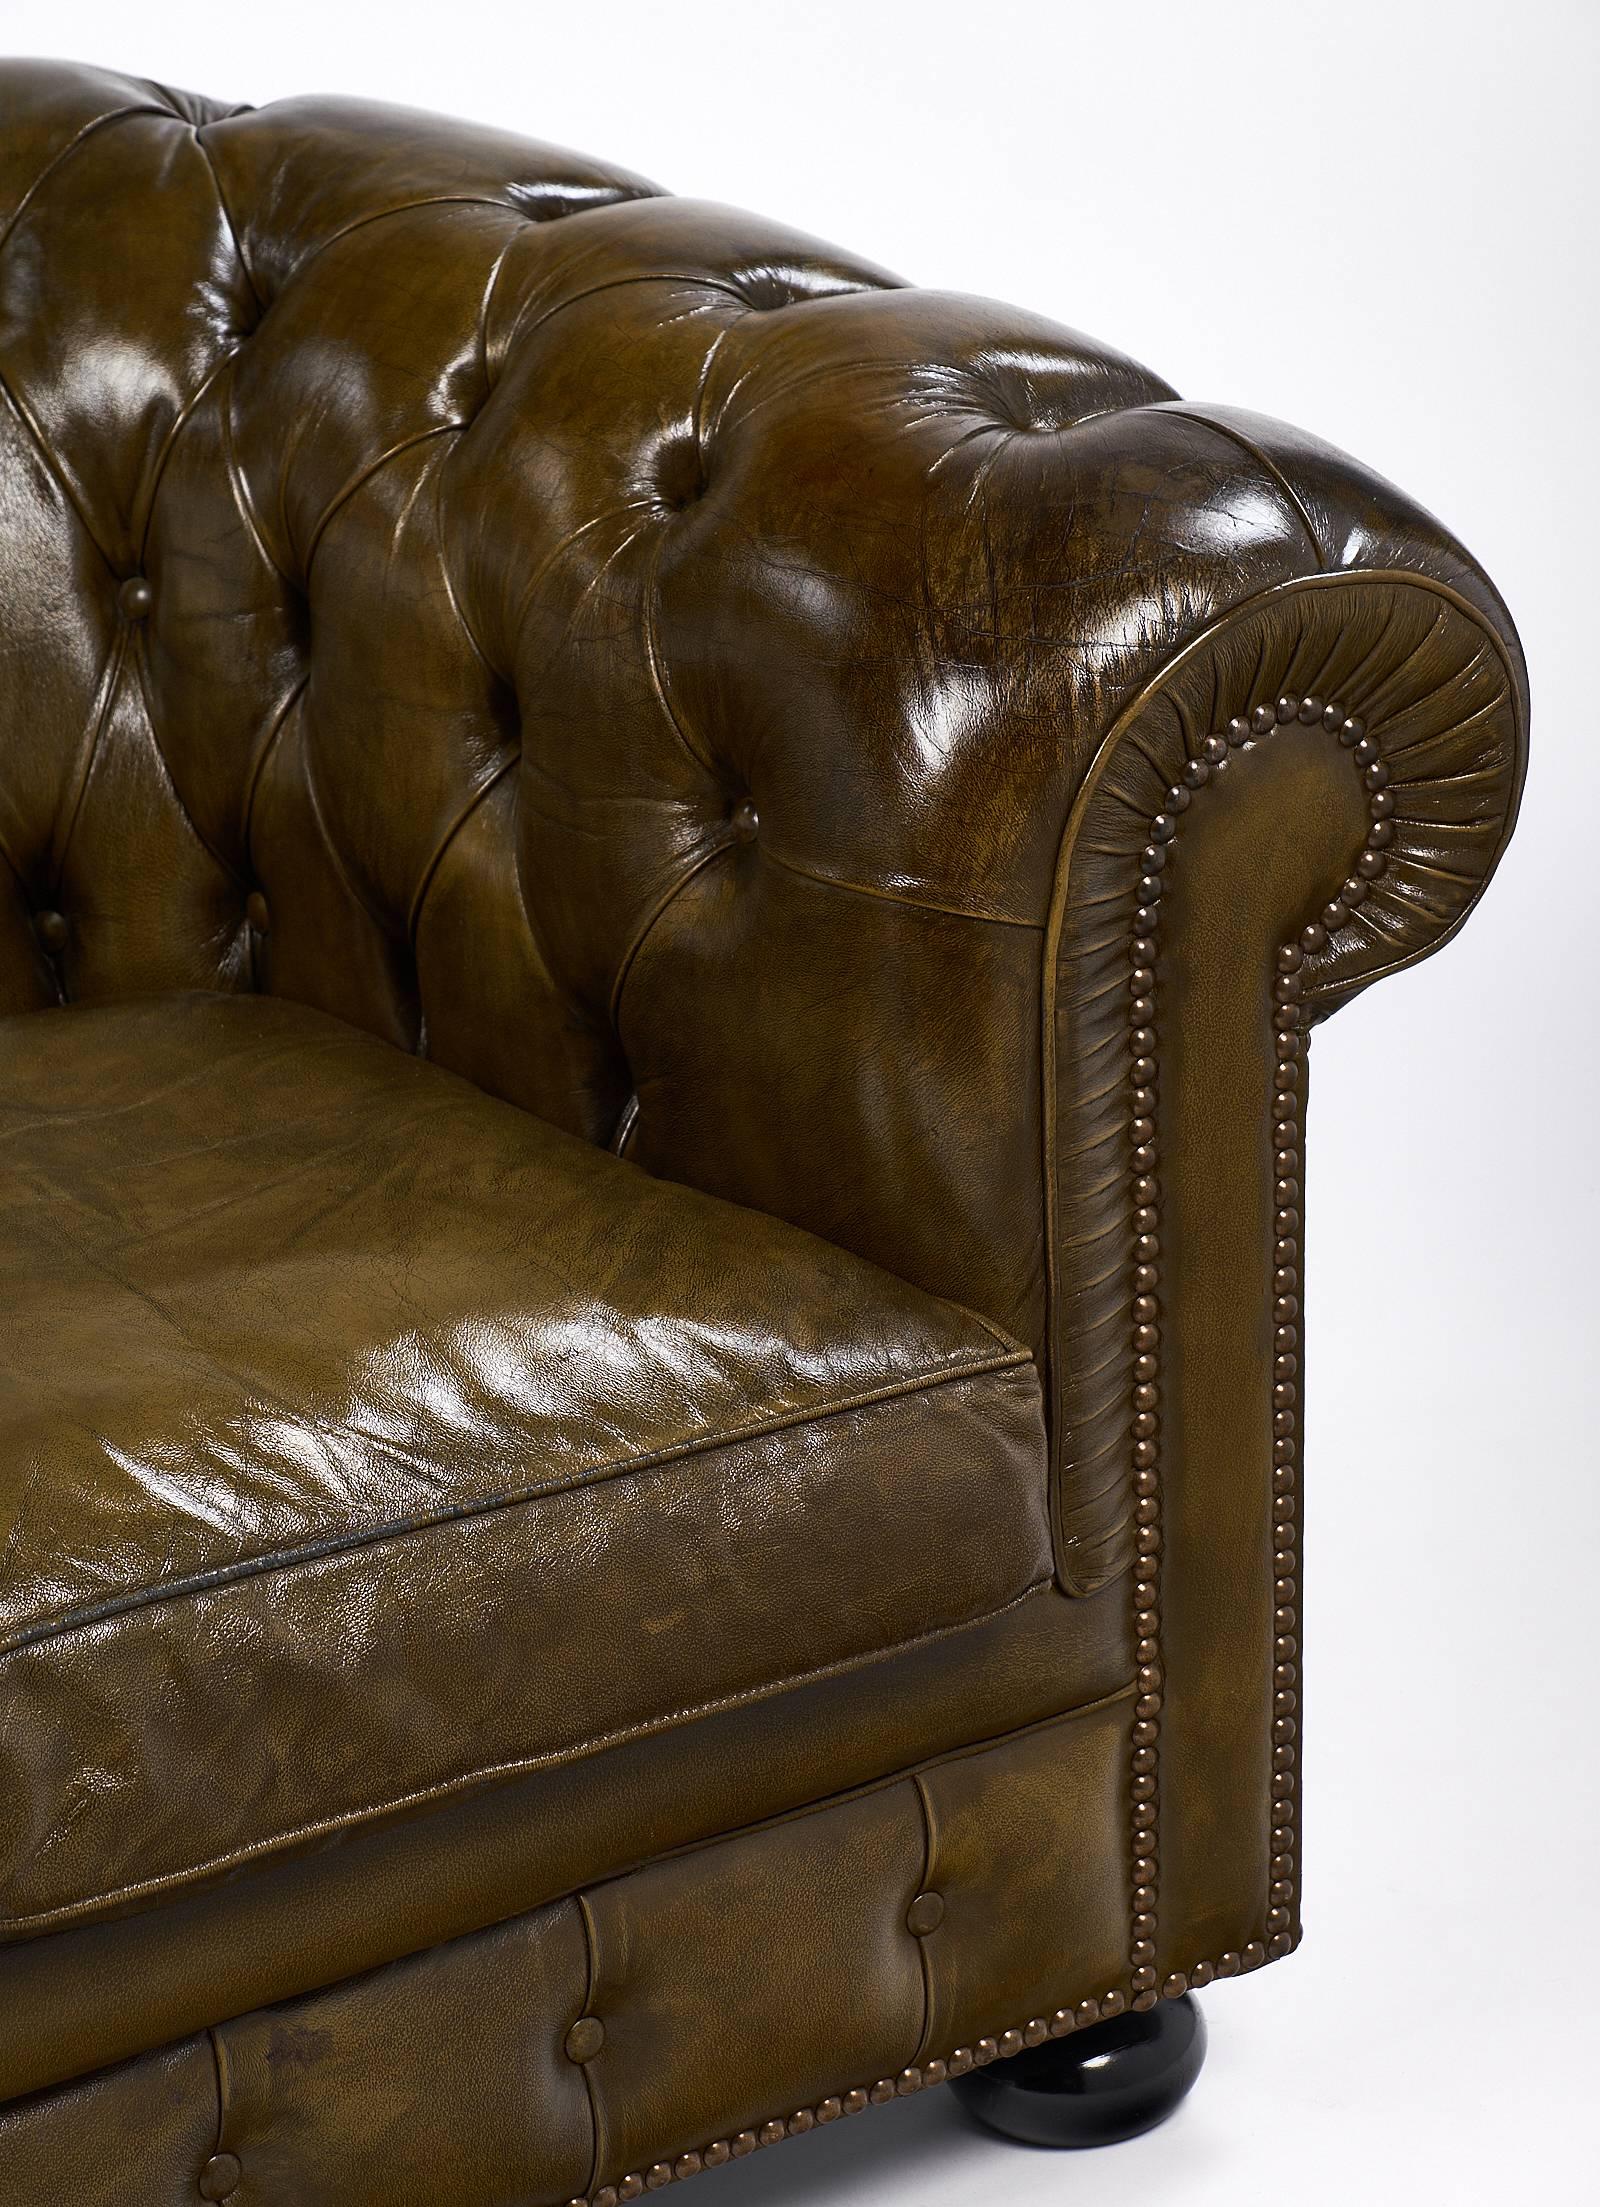 Mid-20th Century English Vintage Chesterfield Leather Sofa